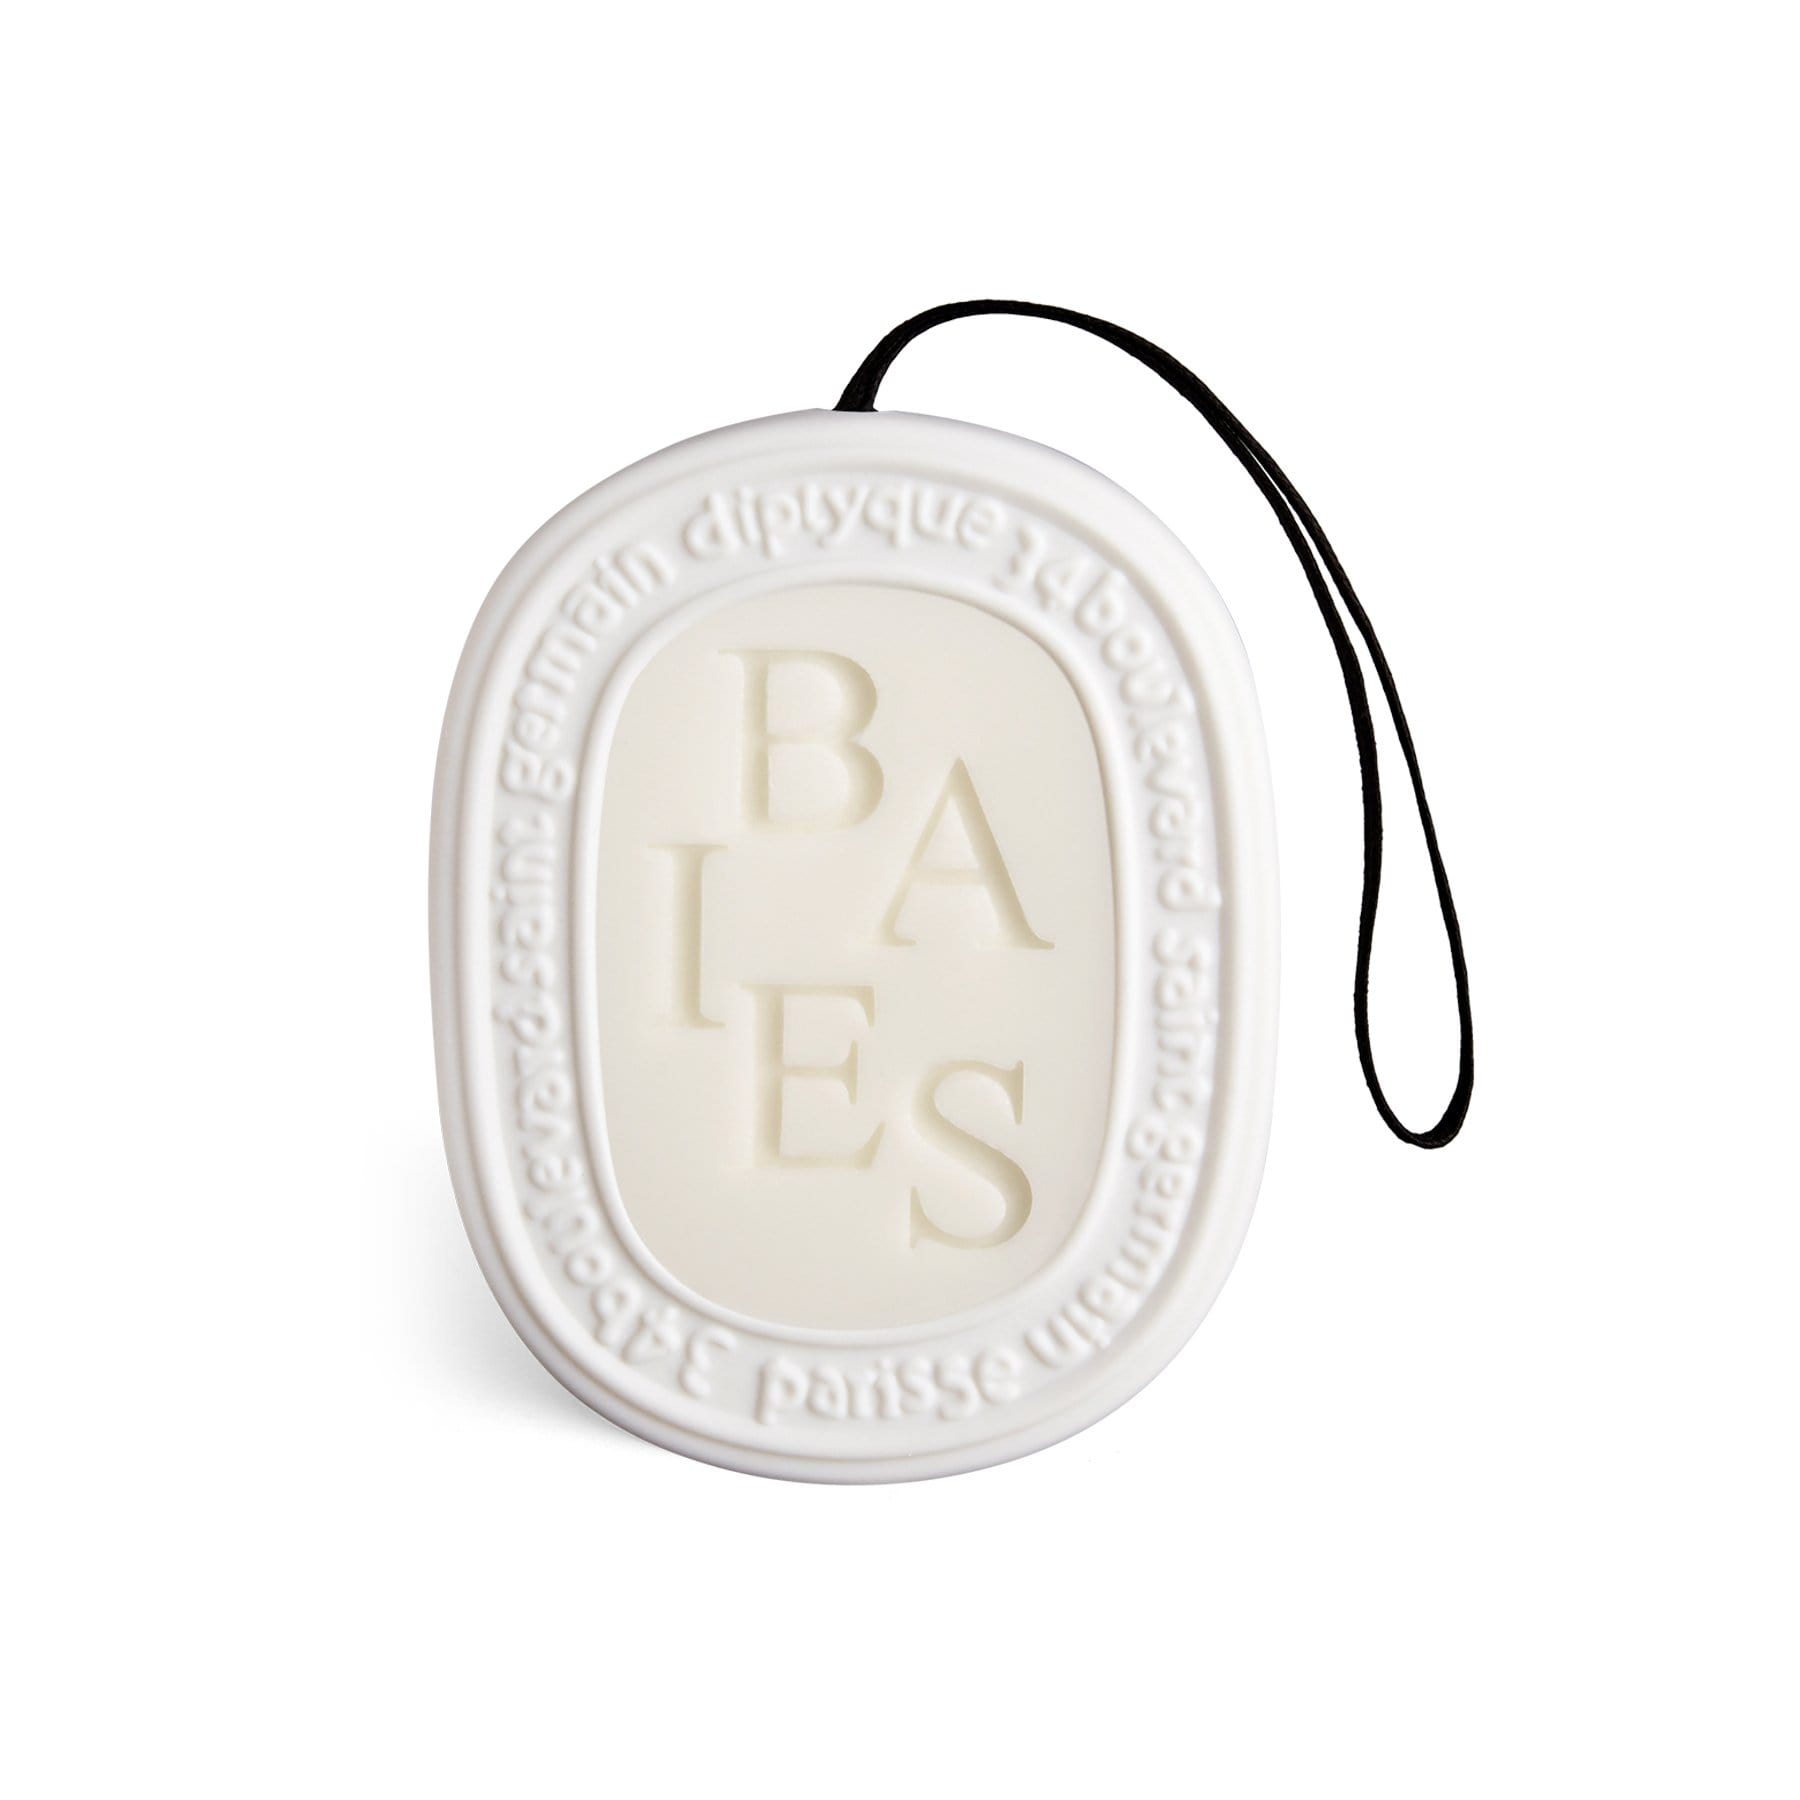 Baies Diptyque scented oval